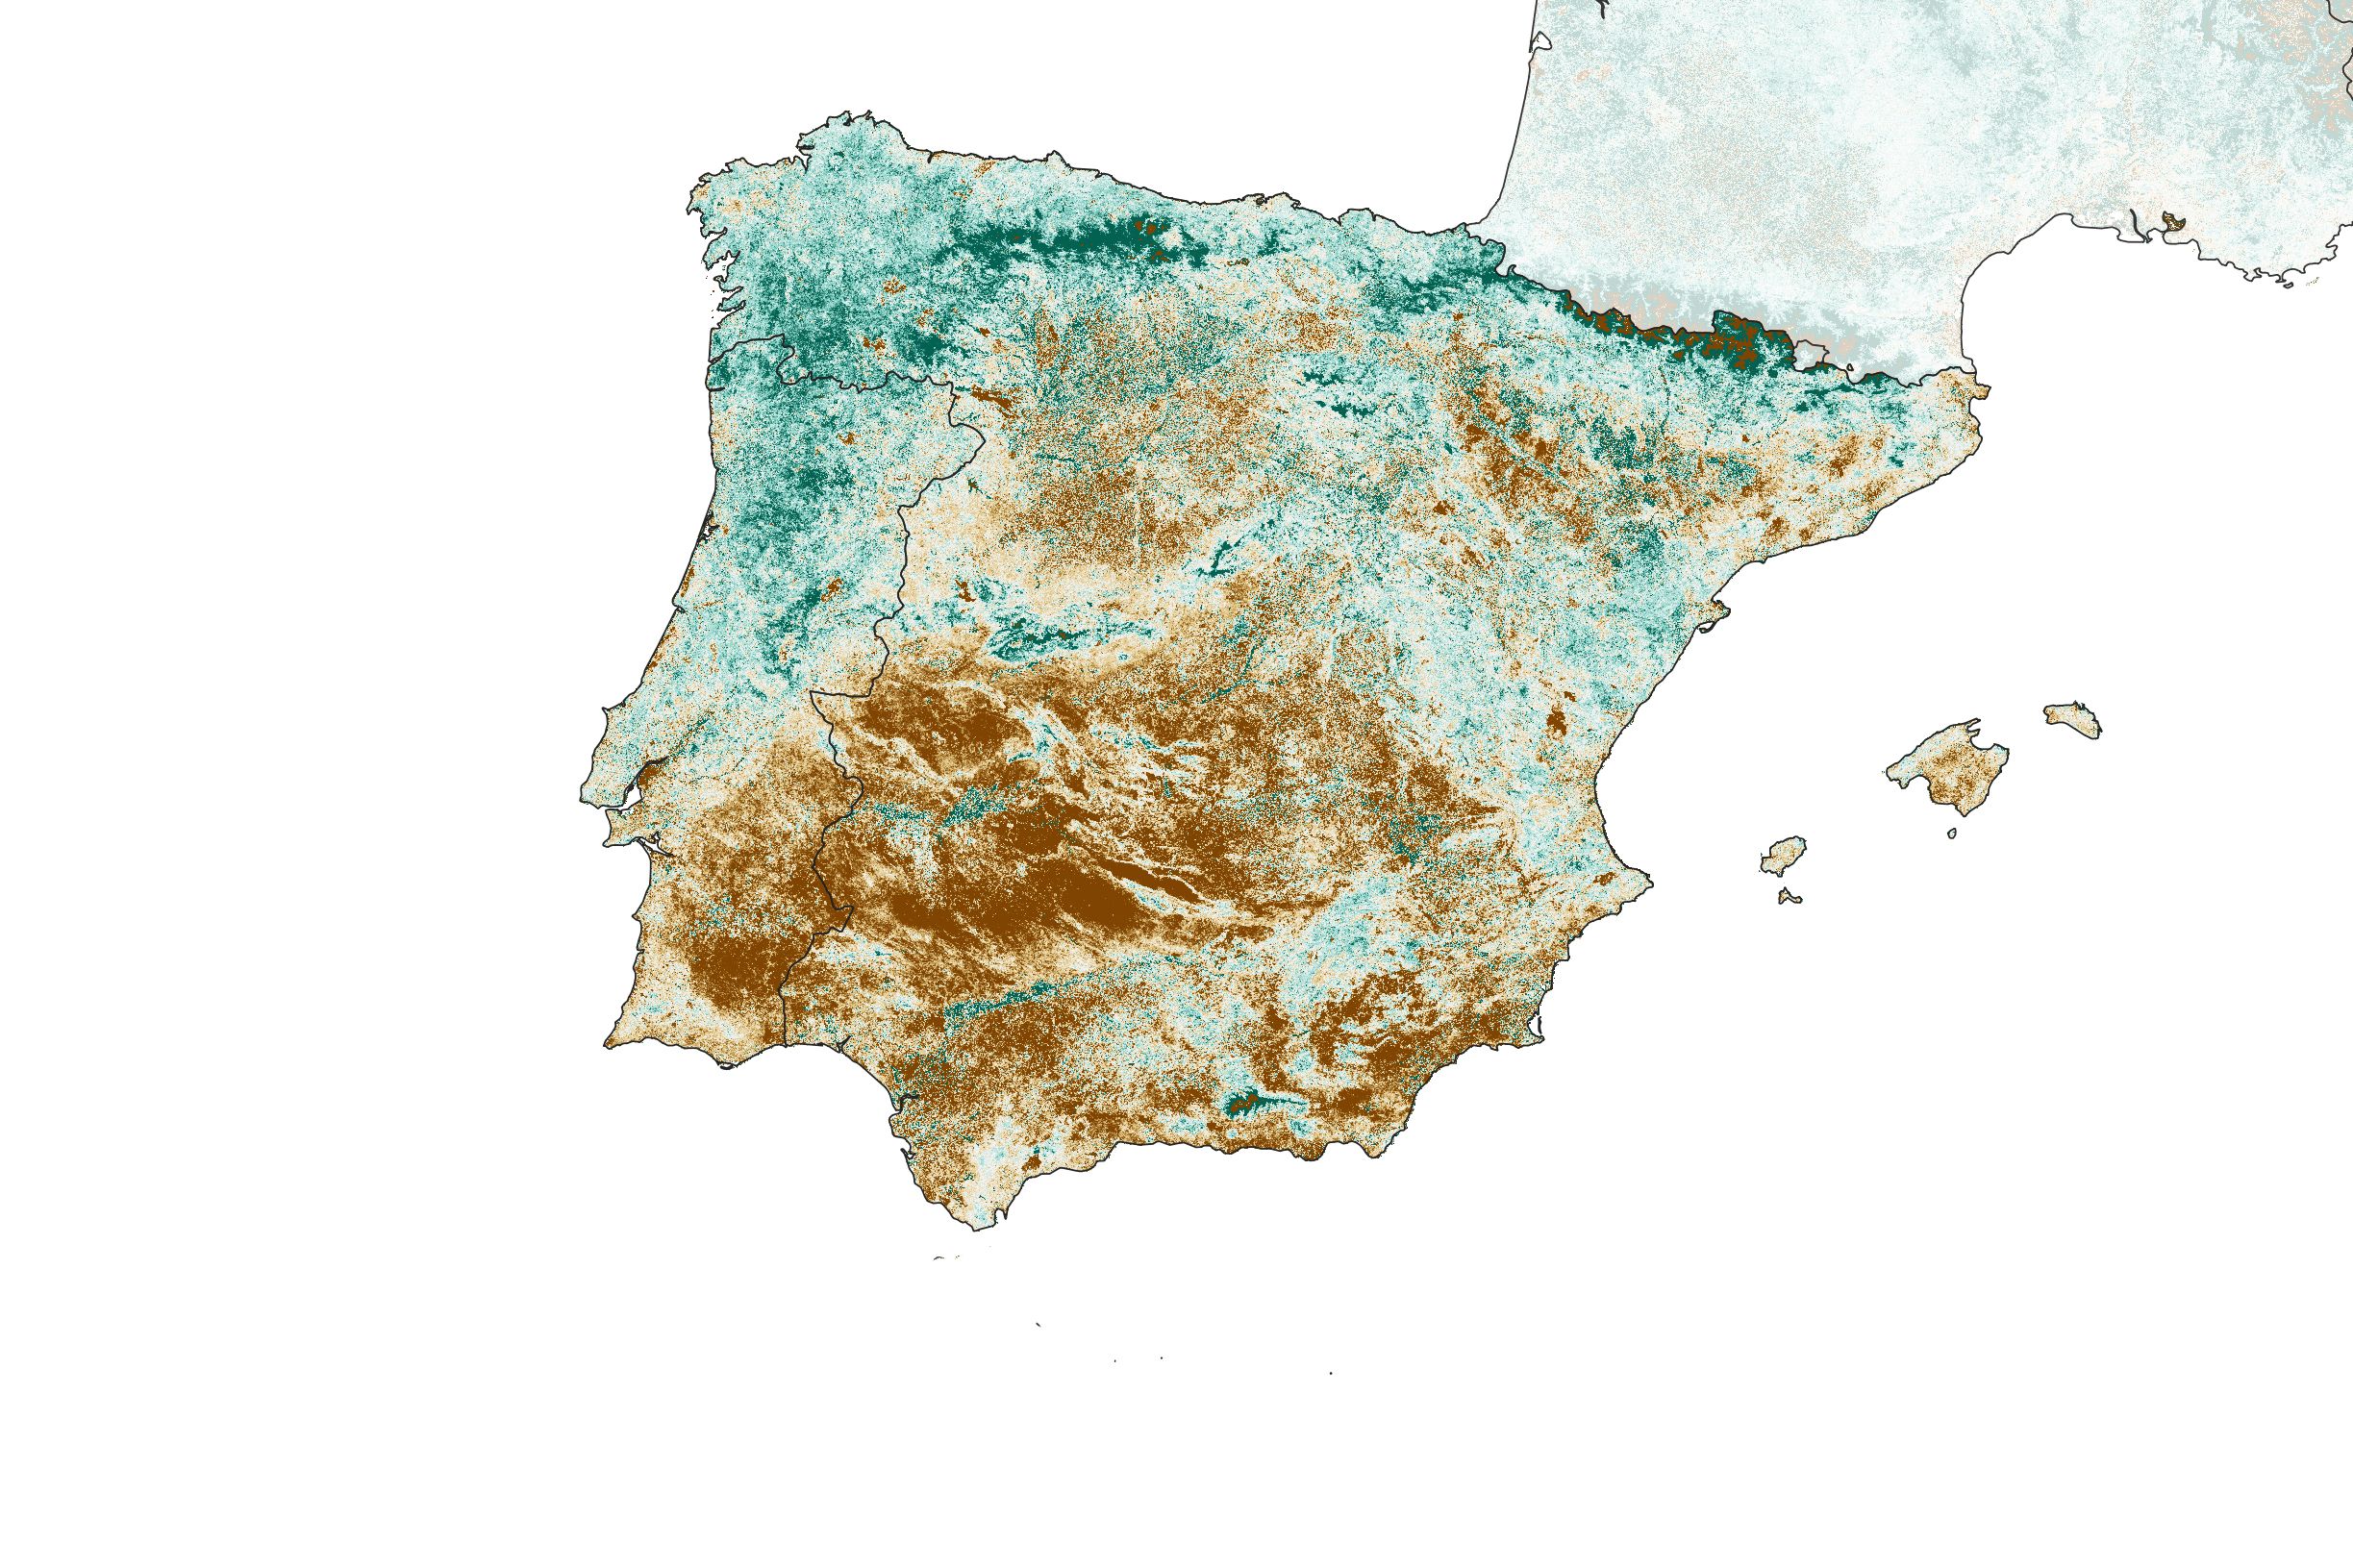 Spain browned by drought